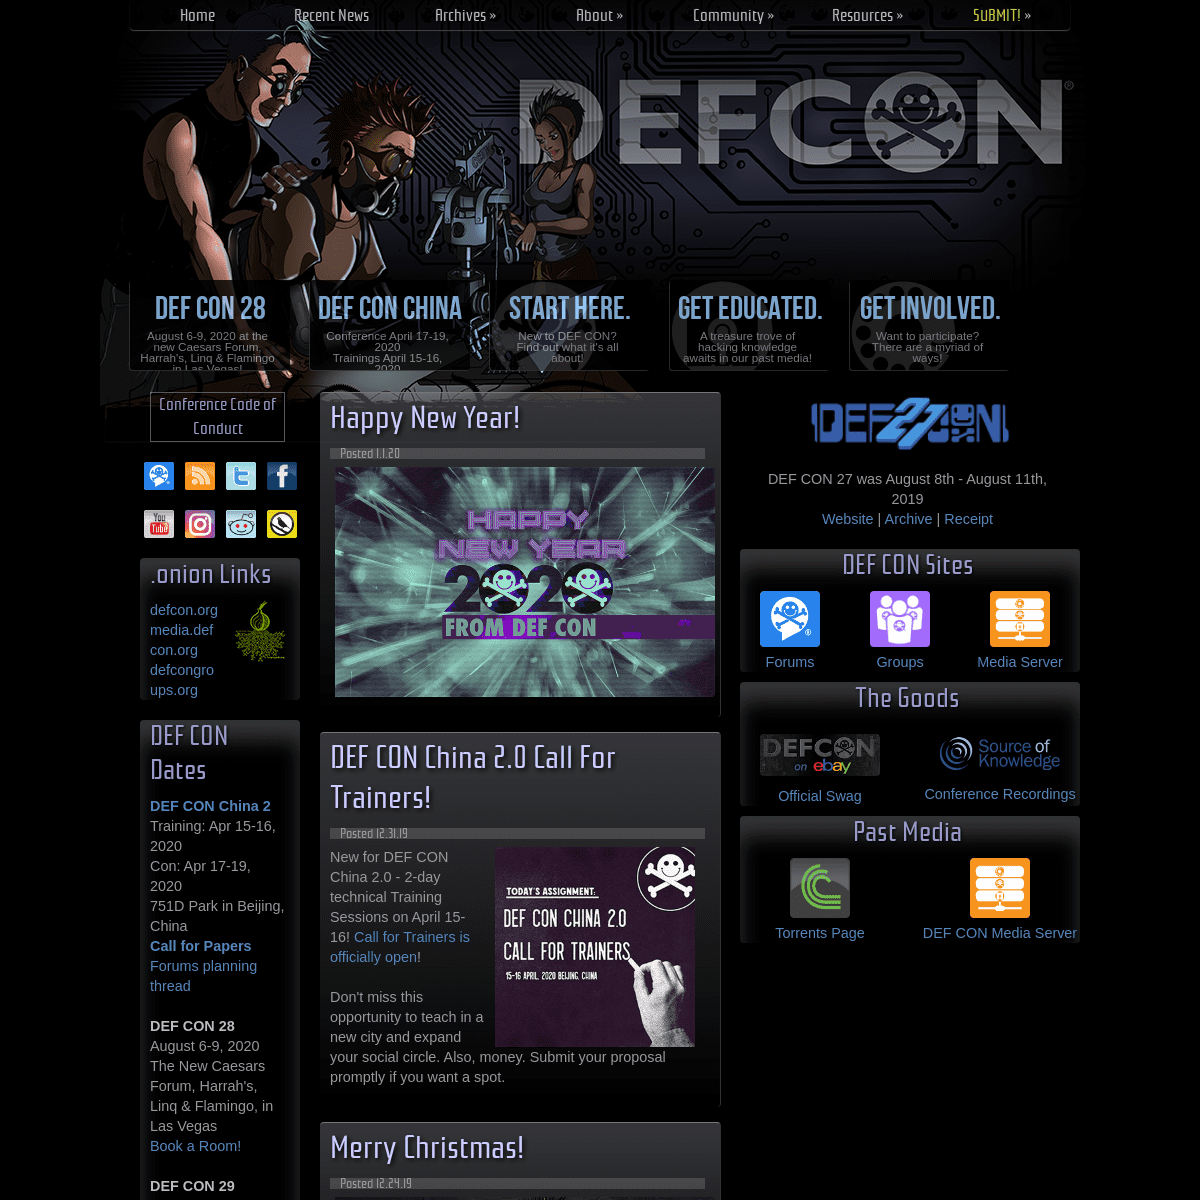 A complete backup of defcon.org